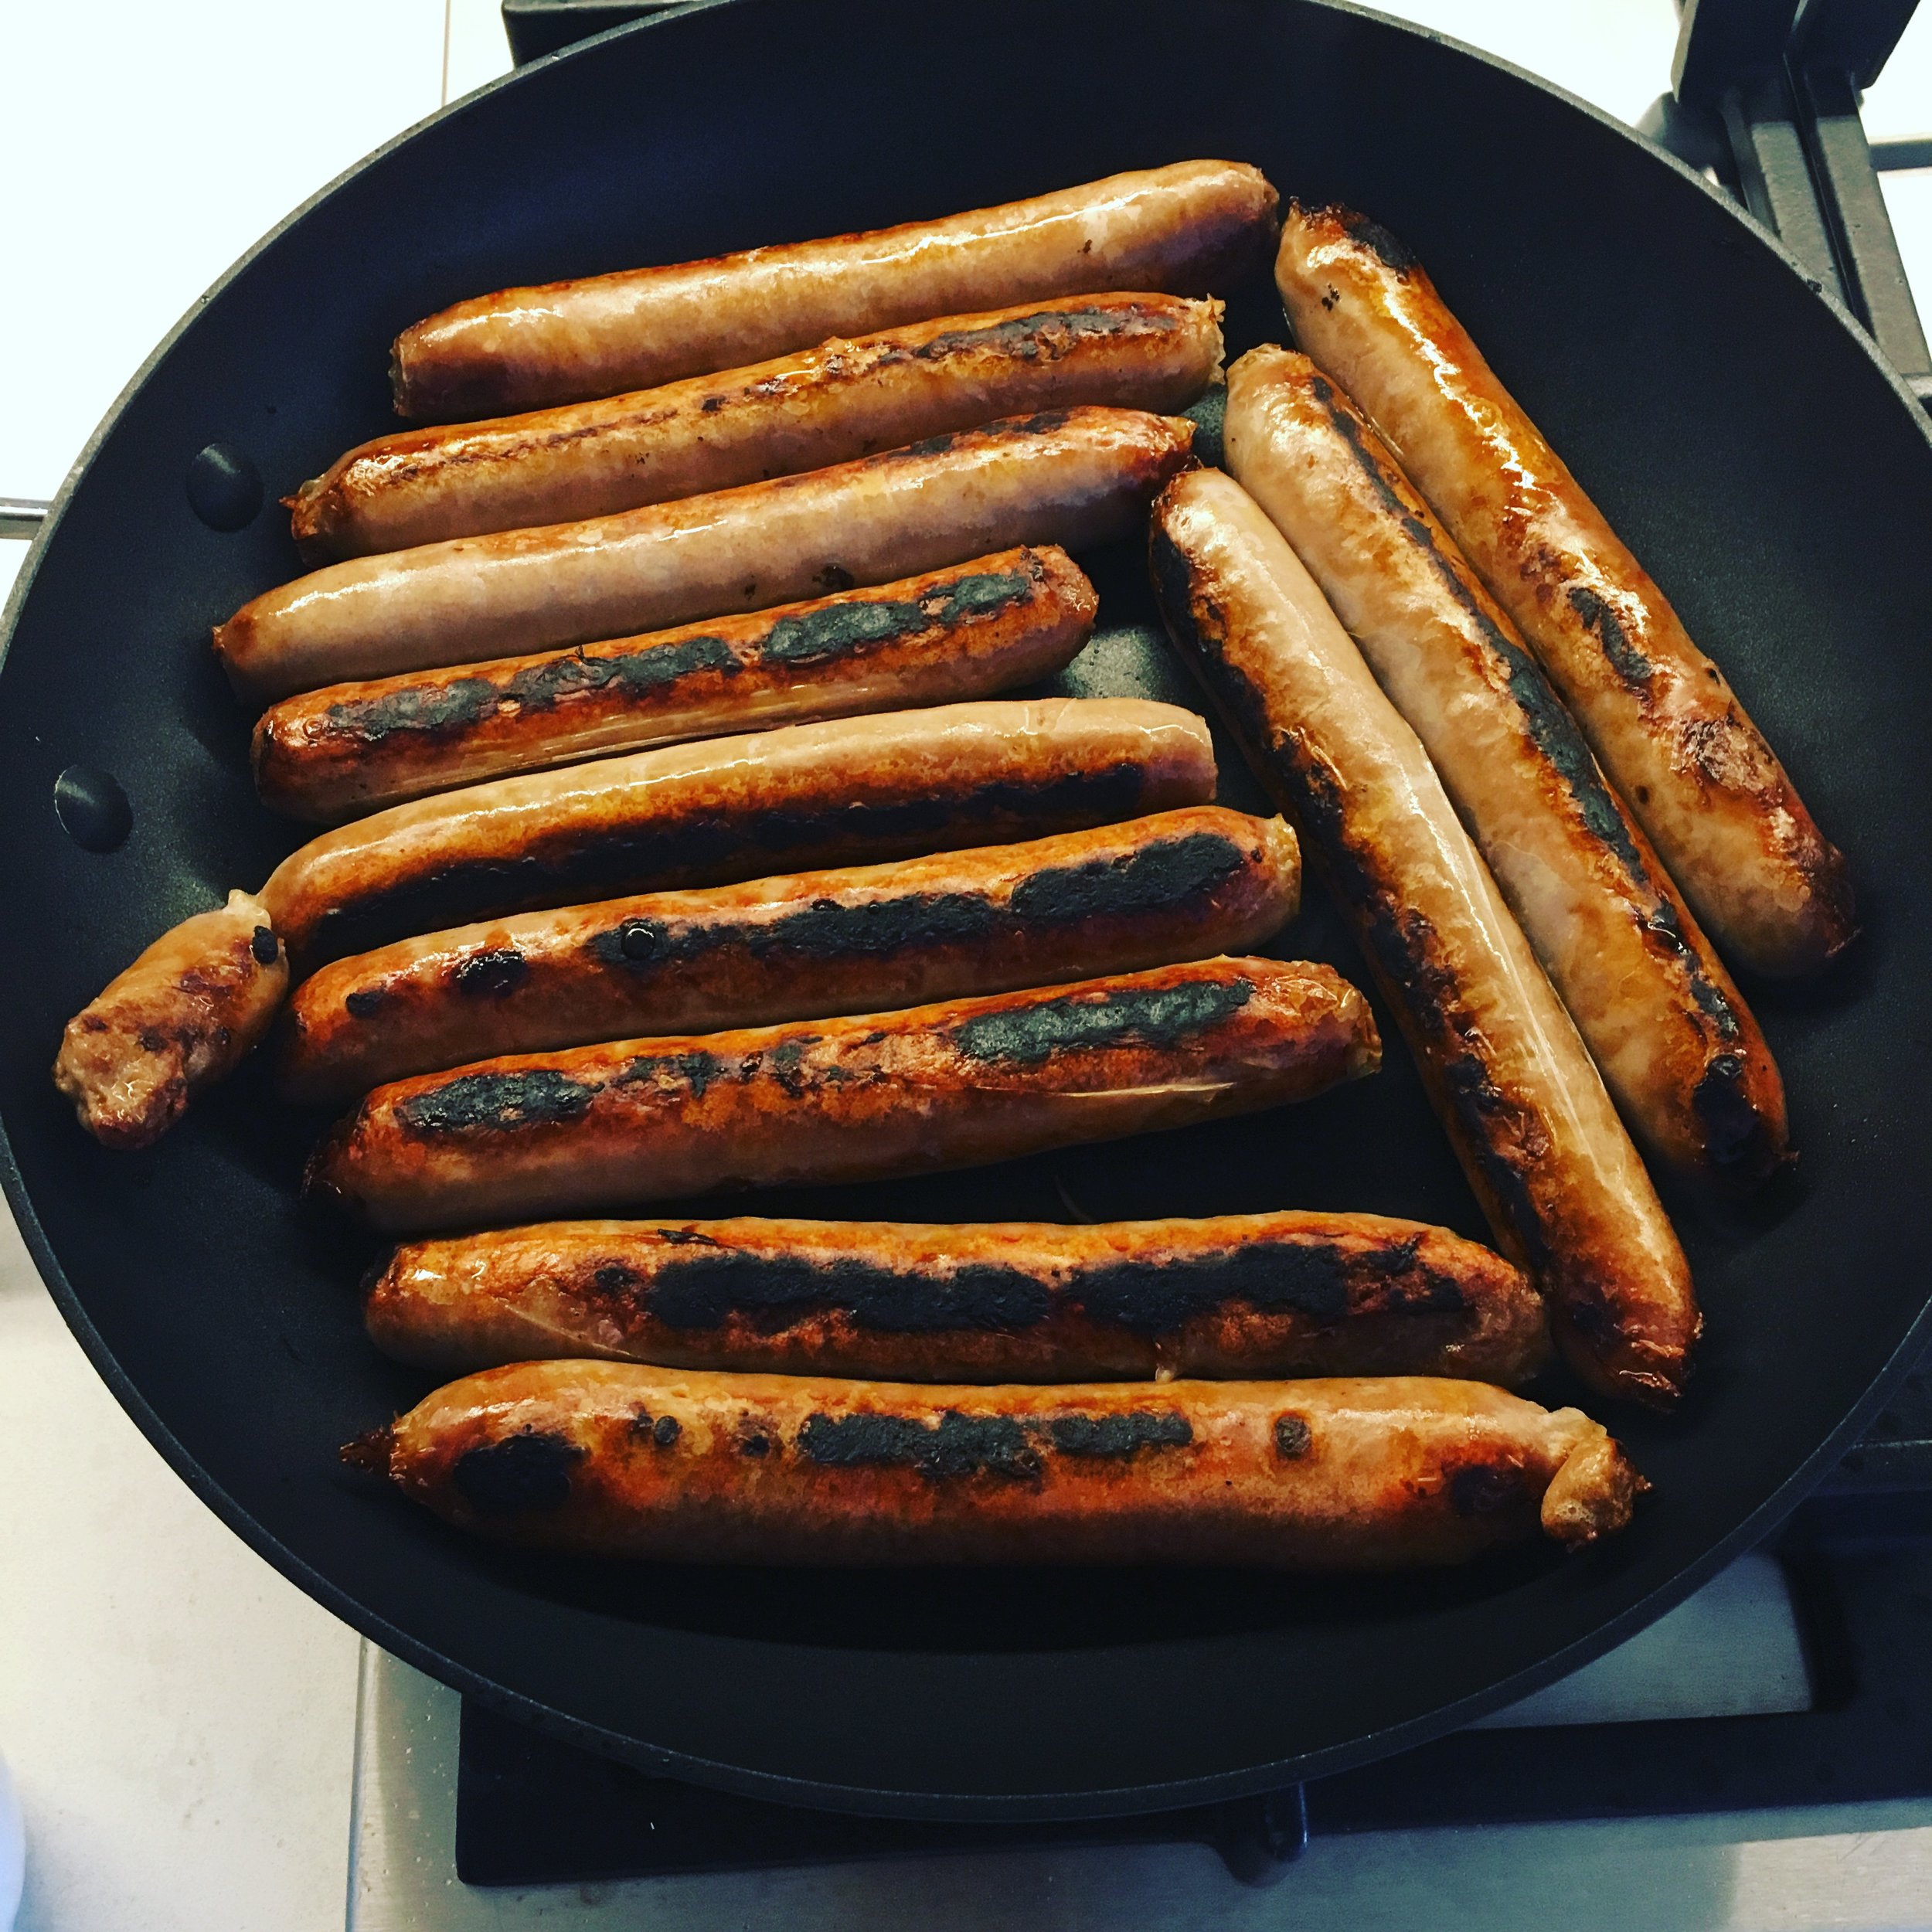 Sizzling sausages